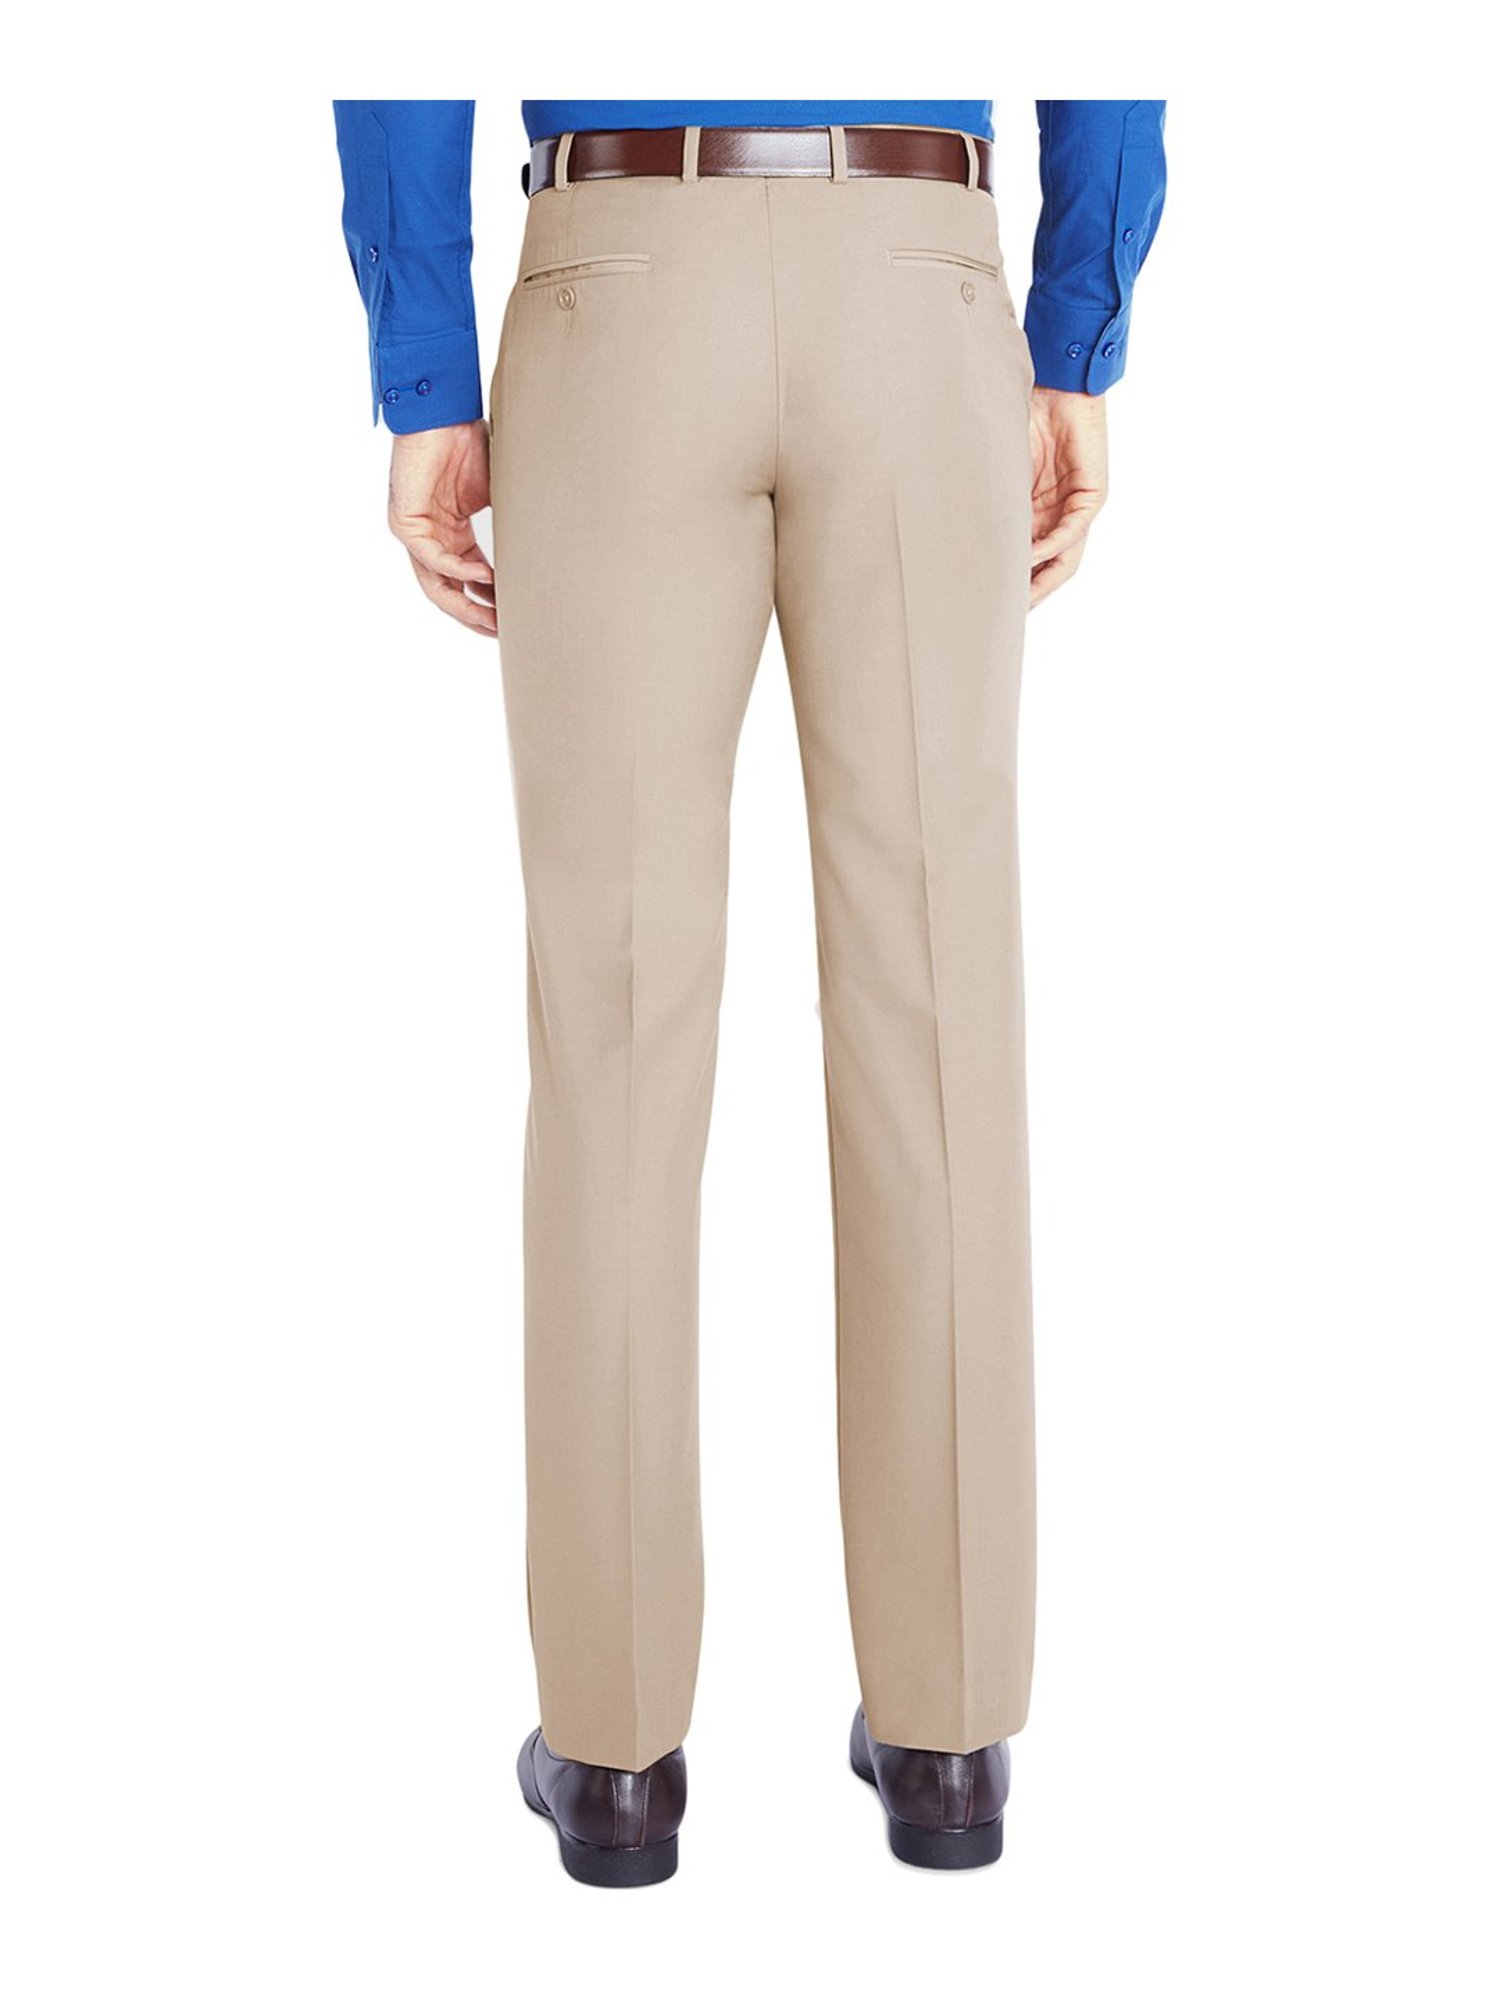 Raymond Park Avenue Blue Slim Fit Trouser PMTL04874B581F096 42 in Mumbai  at best price by Brand Factory  Justdial